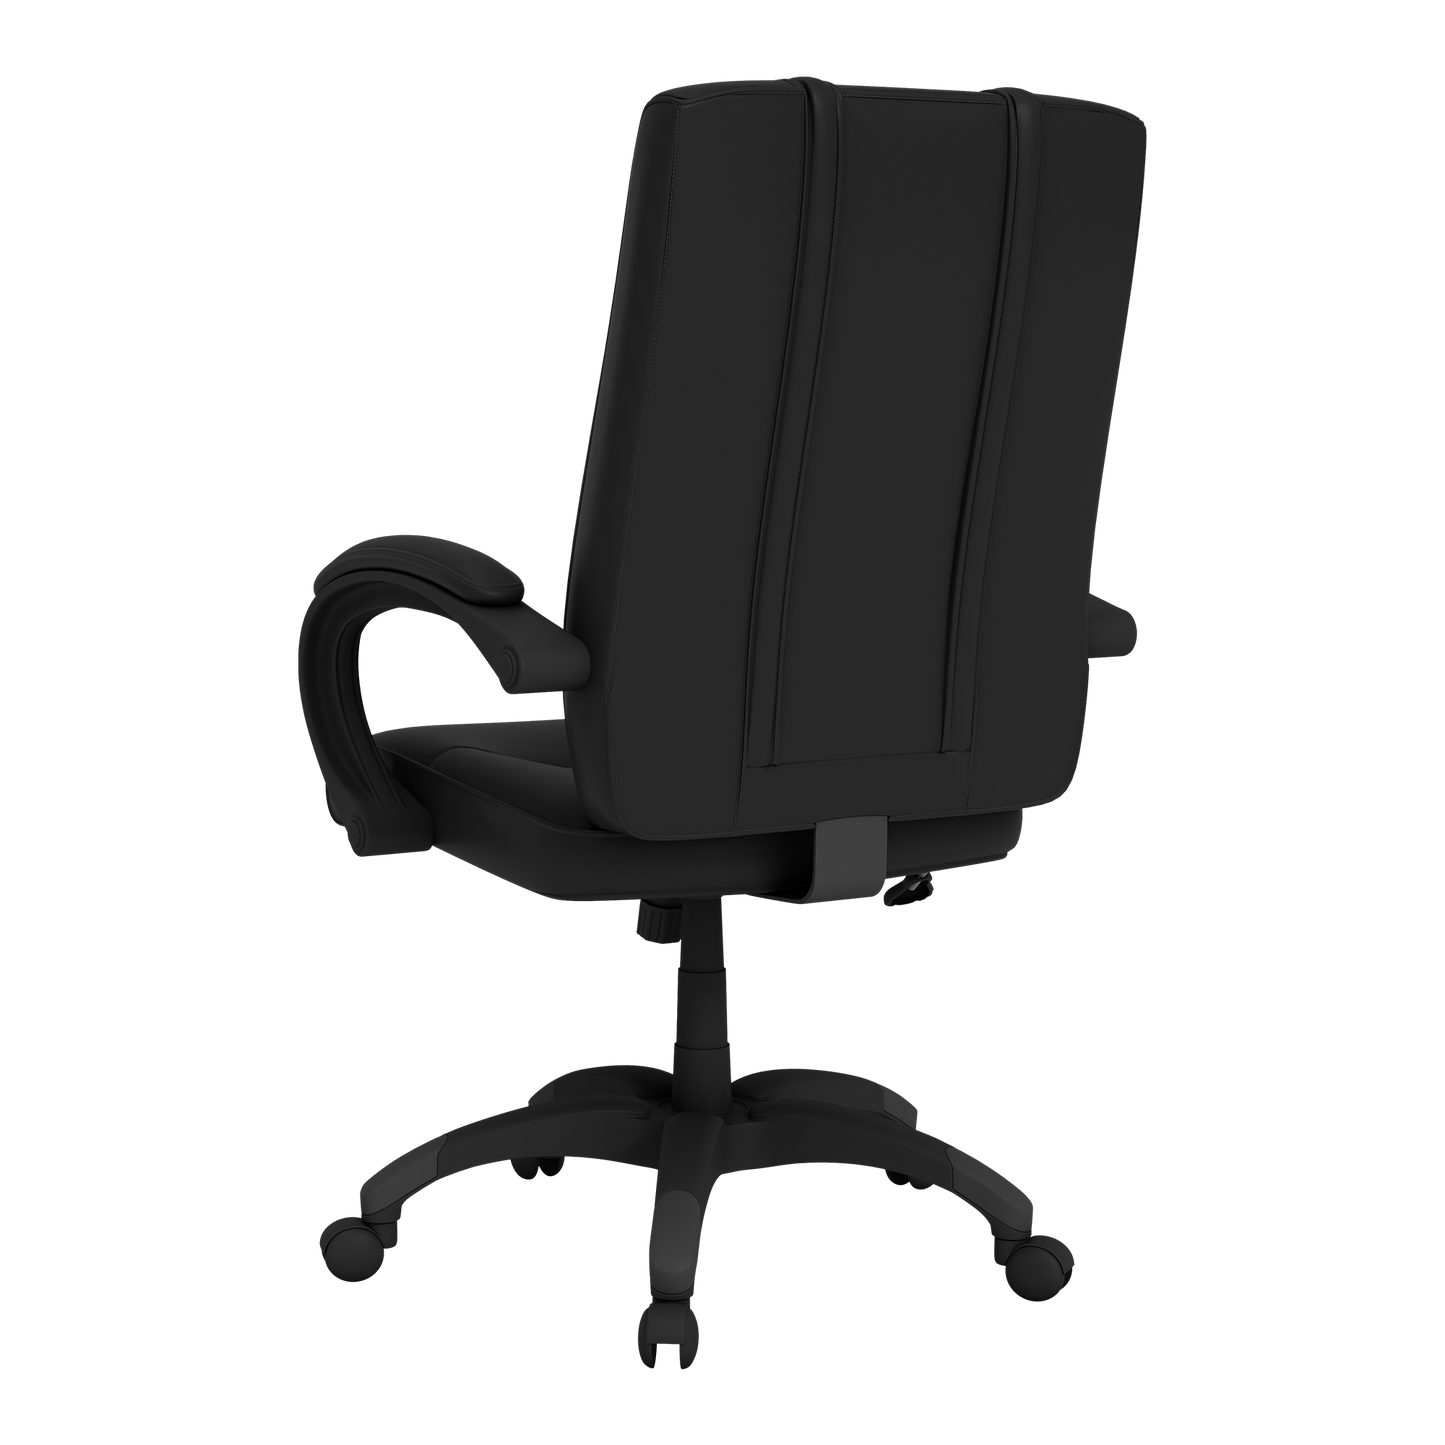 Office Chair 1000 with Arizona State Sundevils Logo